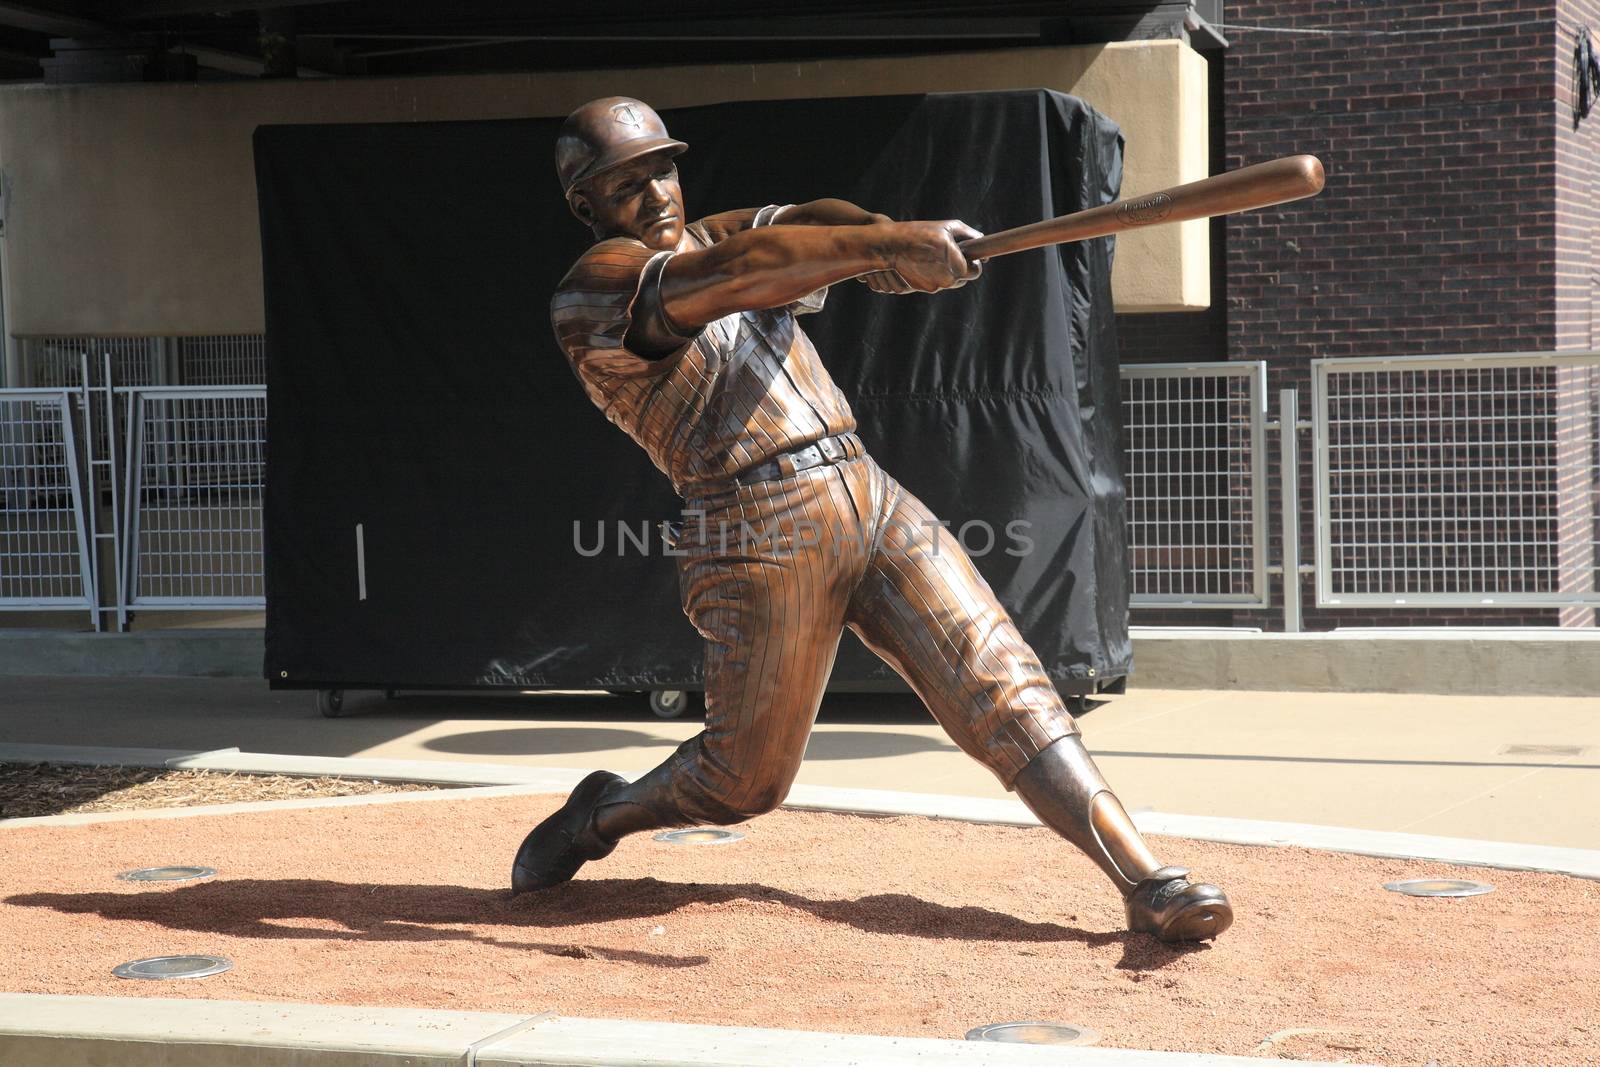 Statue of Harmon Killebrew displayed at Target Field, home ballpark of the Minnesota Twins.